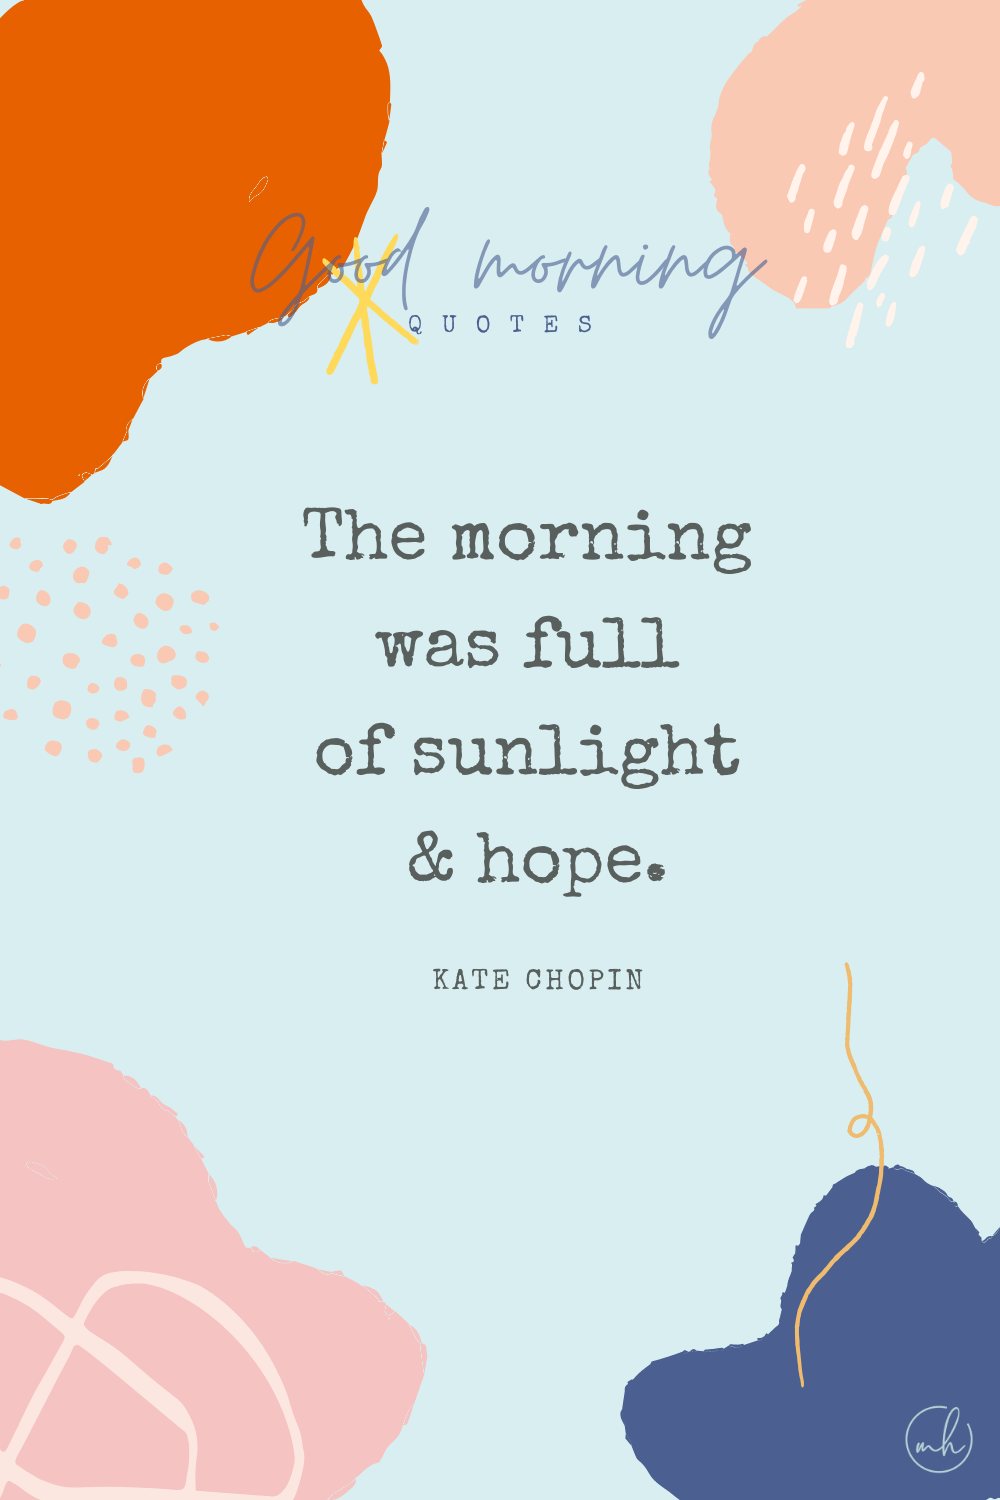 "The morning was full of sunlight and hope." – Kate Chopin